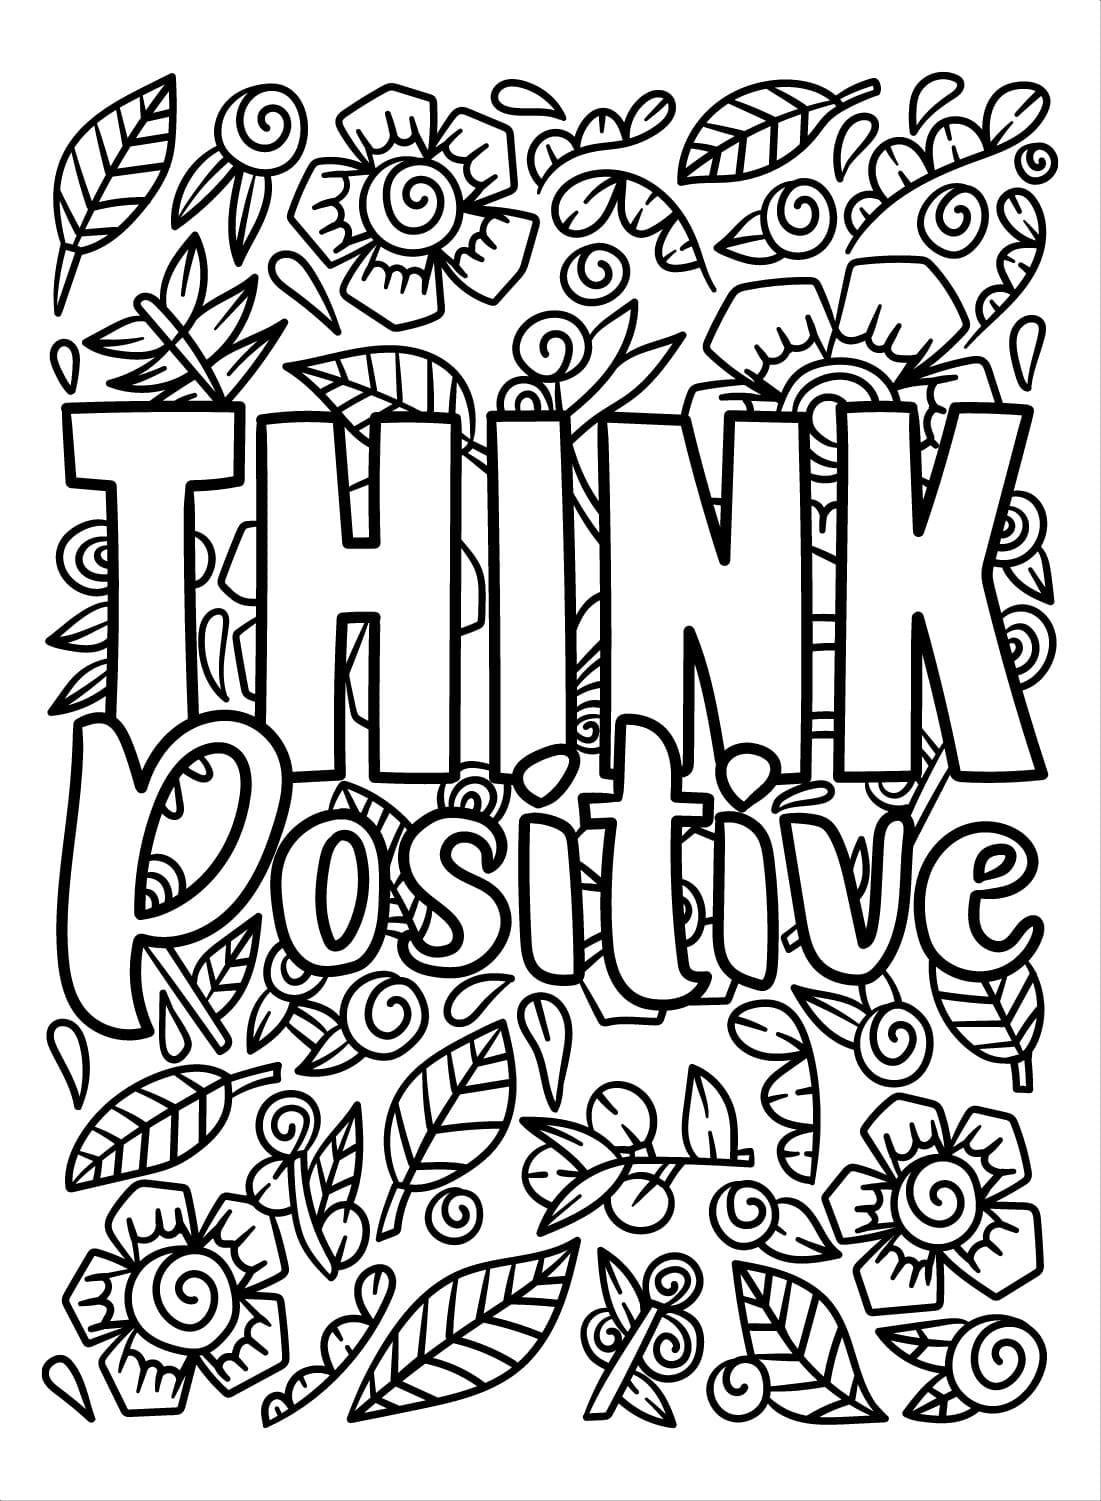 Inspirational - Think Positive coloring page - Download, Print or Color ...